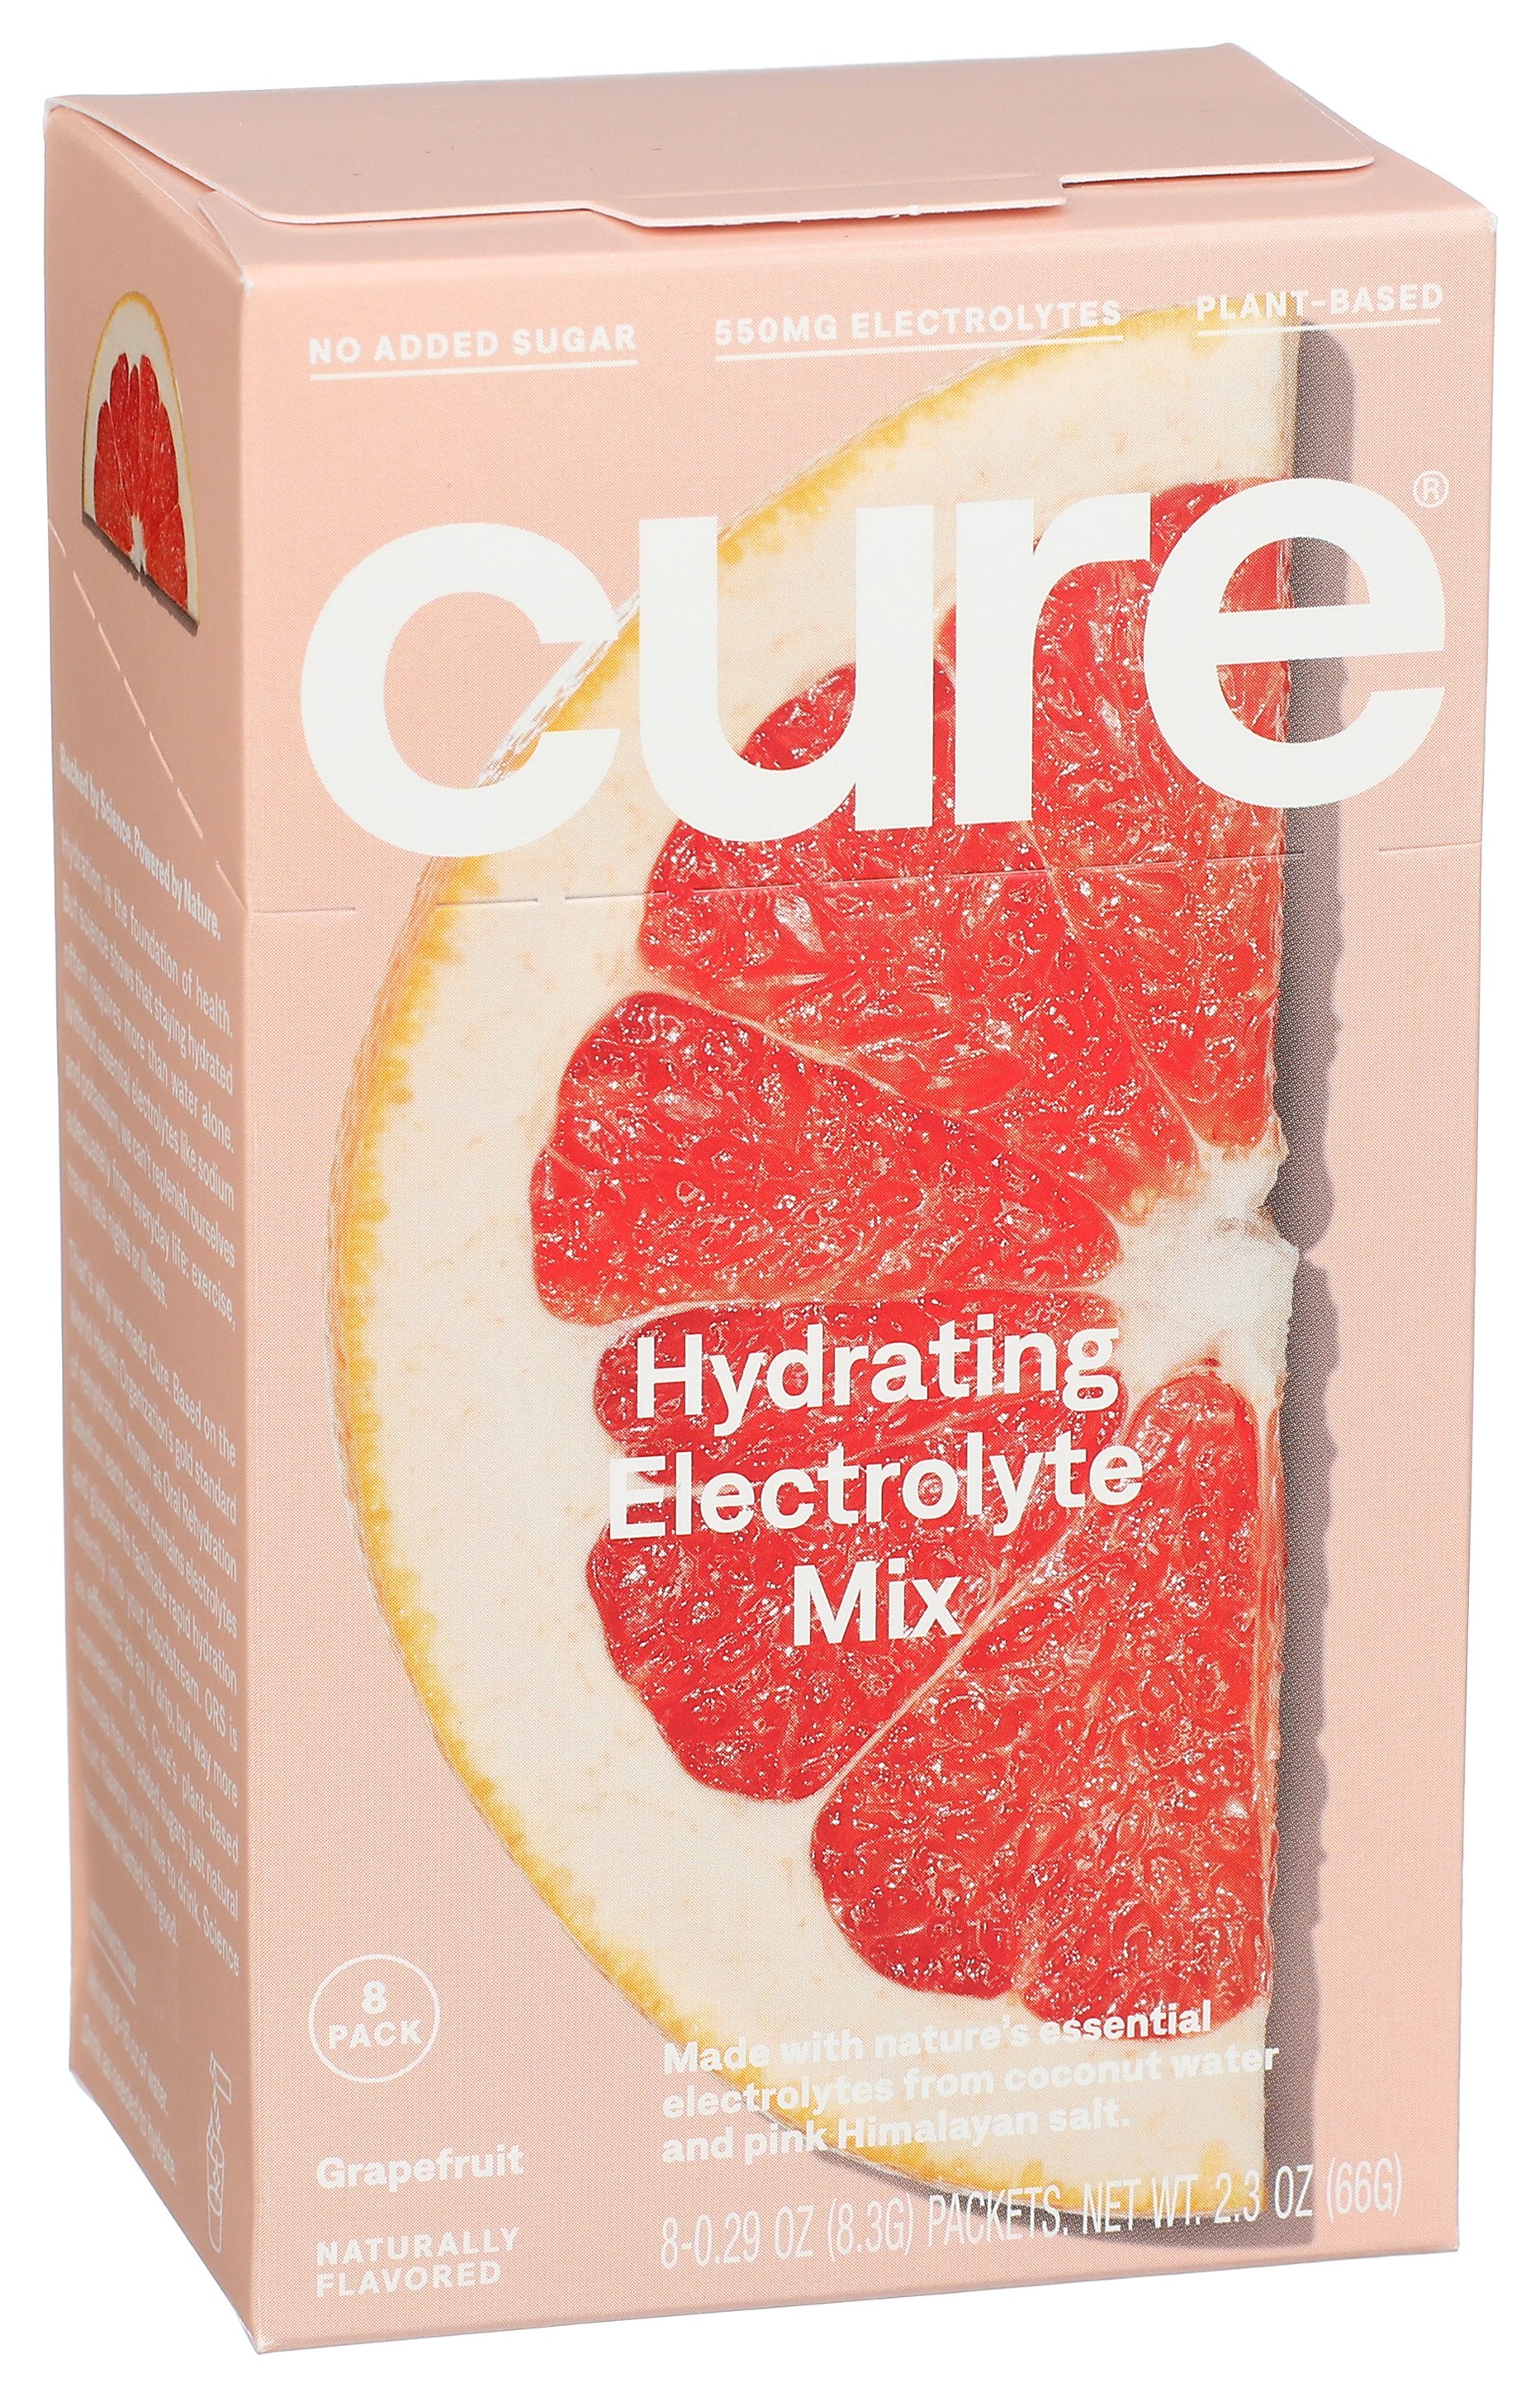 CURE HYDRATION PWDR GRAPEFRUT